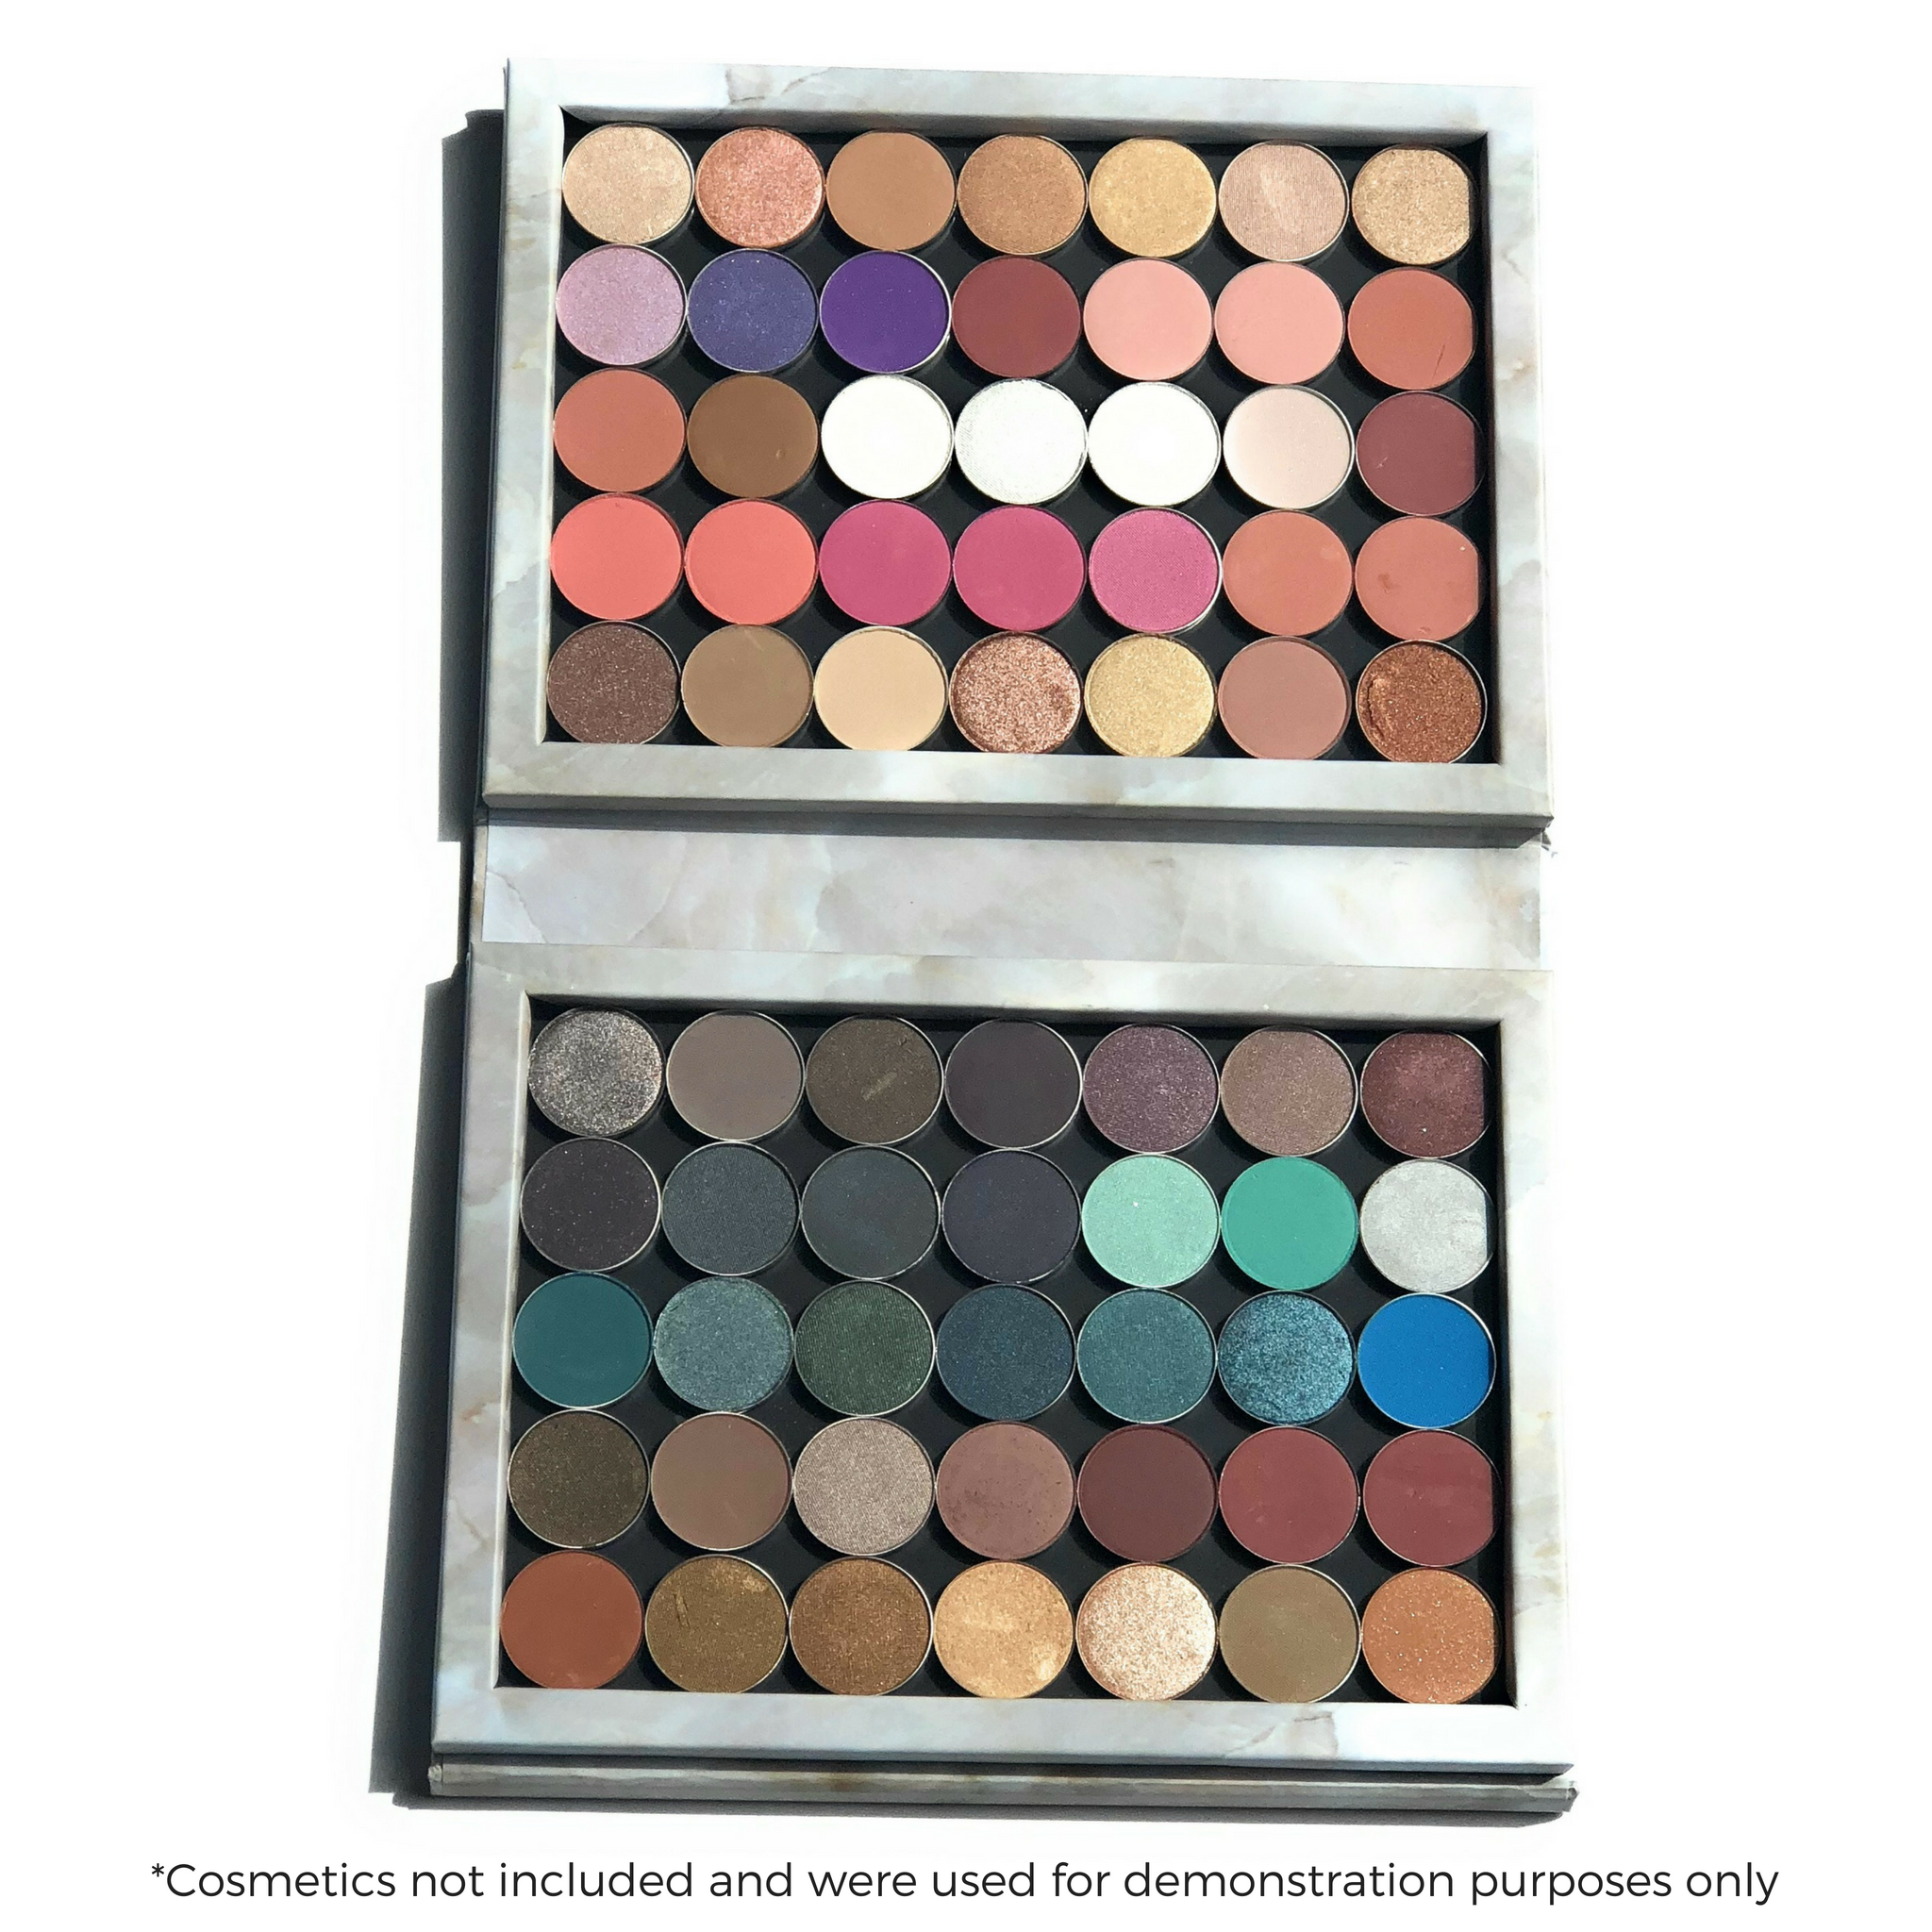 70 pan marble palette, full. Cosmetics not included